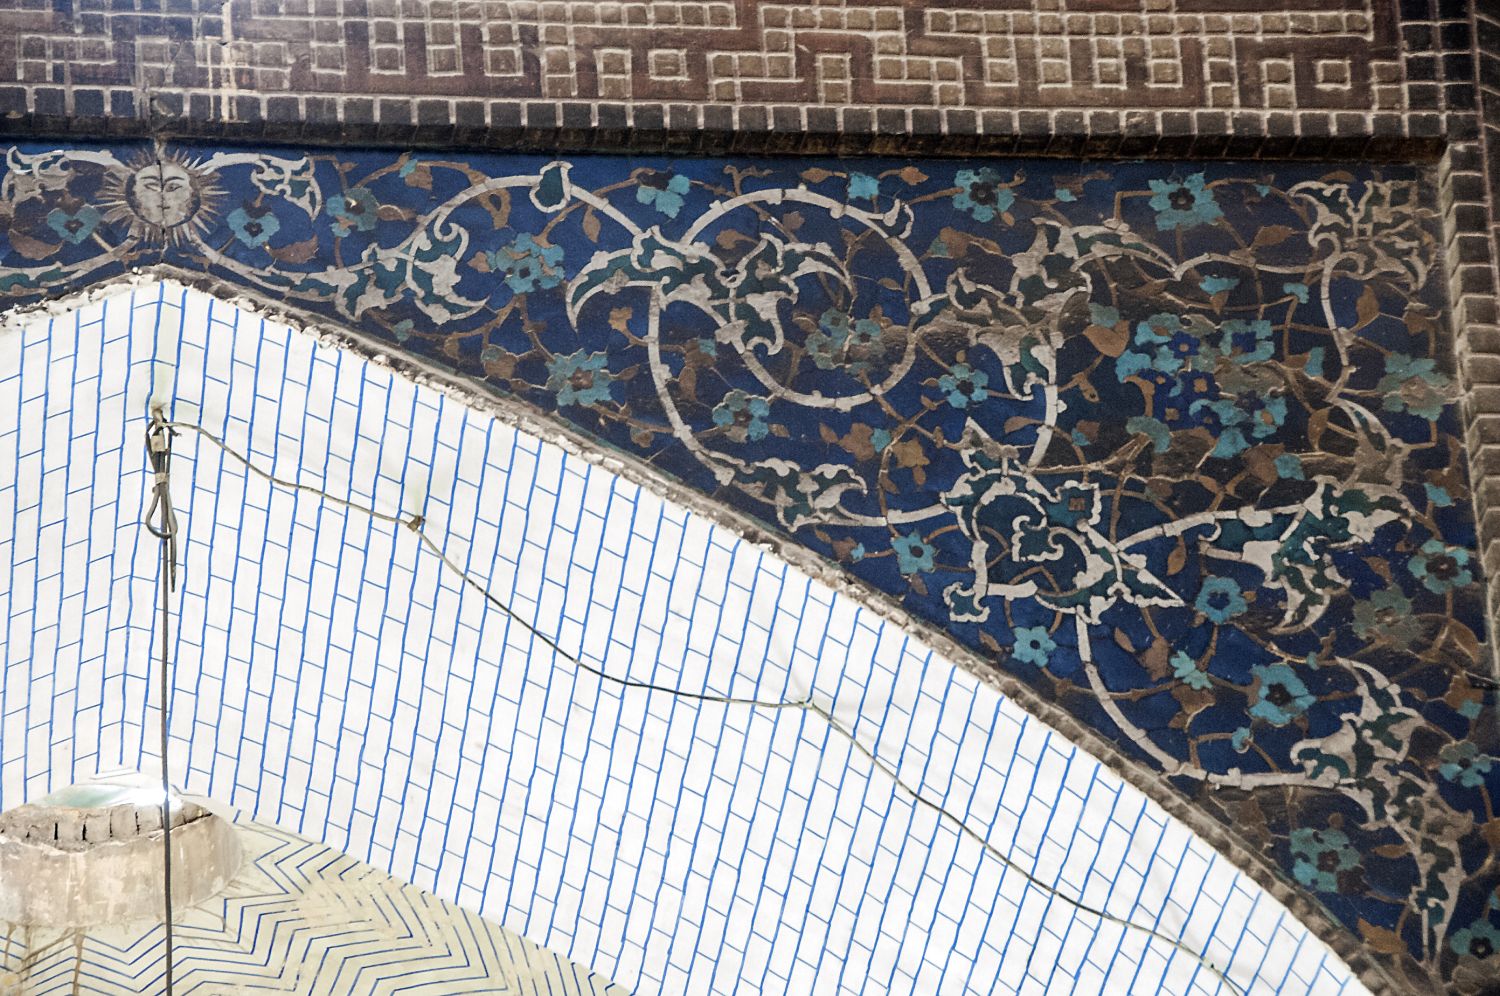 First domed intersection (chahar-su) along arterial street leading north from the main gate, placed at entrance to the Saray-i Shah.  Detail view of spandrel with Safavid tile mosaic decoration.